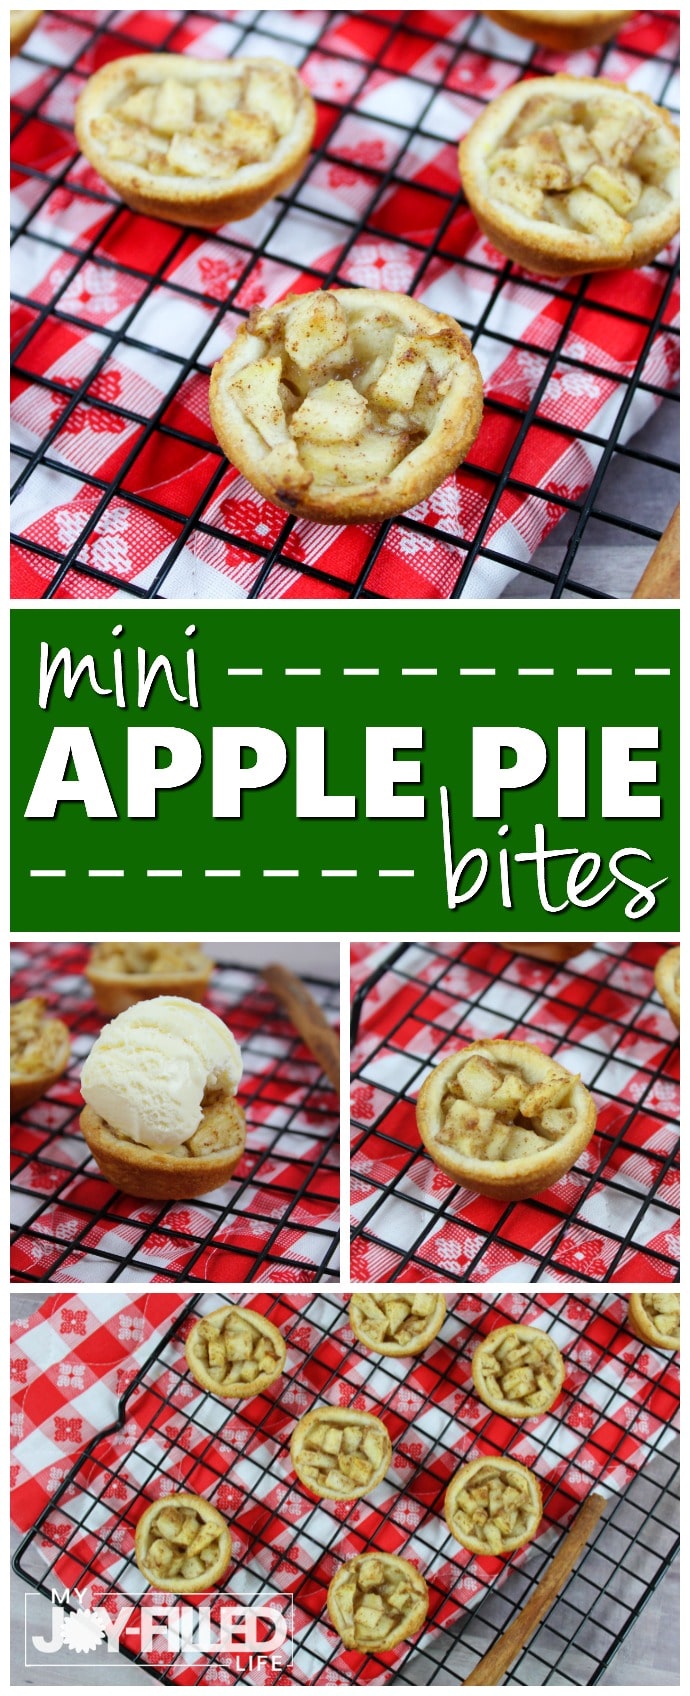 These mini apple pie bites are the perfect mini treat for kids or an adorable dessert at your holiday party. Each one is packed full of everything that would be in a regular full slice of pie, just on a smaller scale. #applepie 